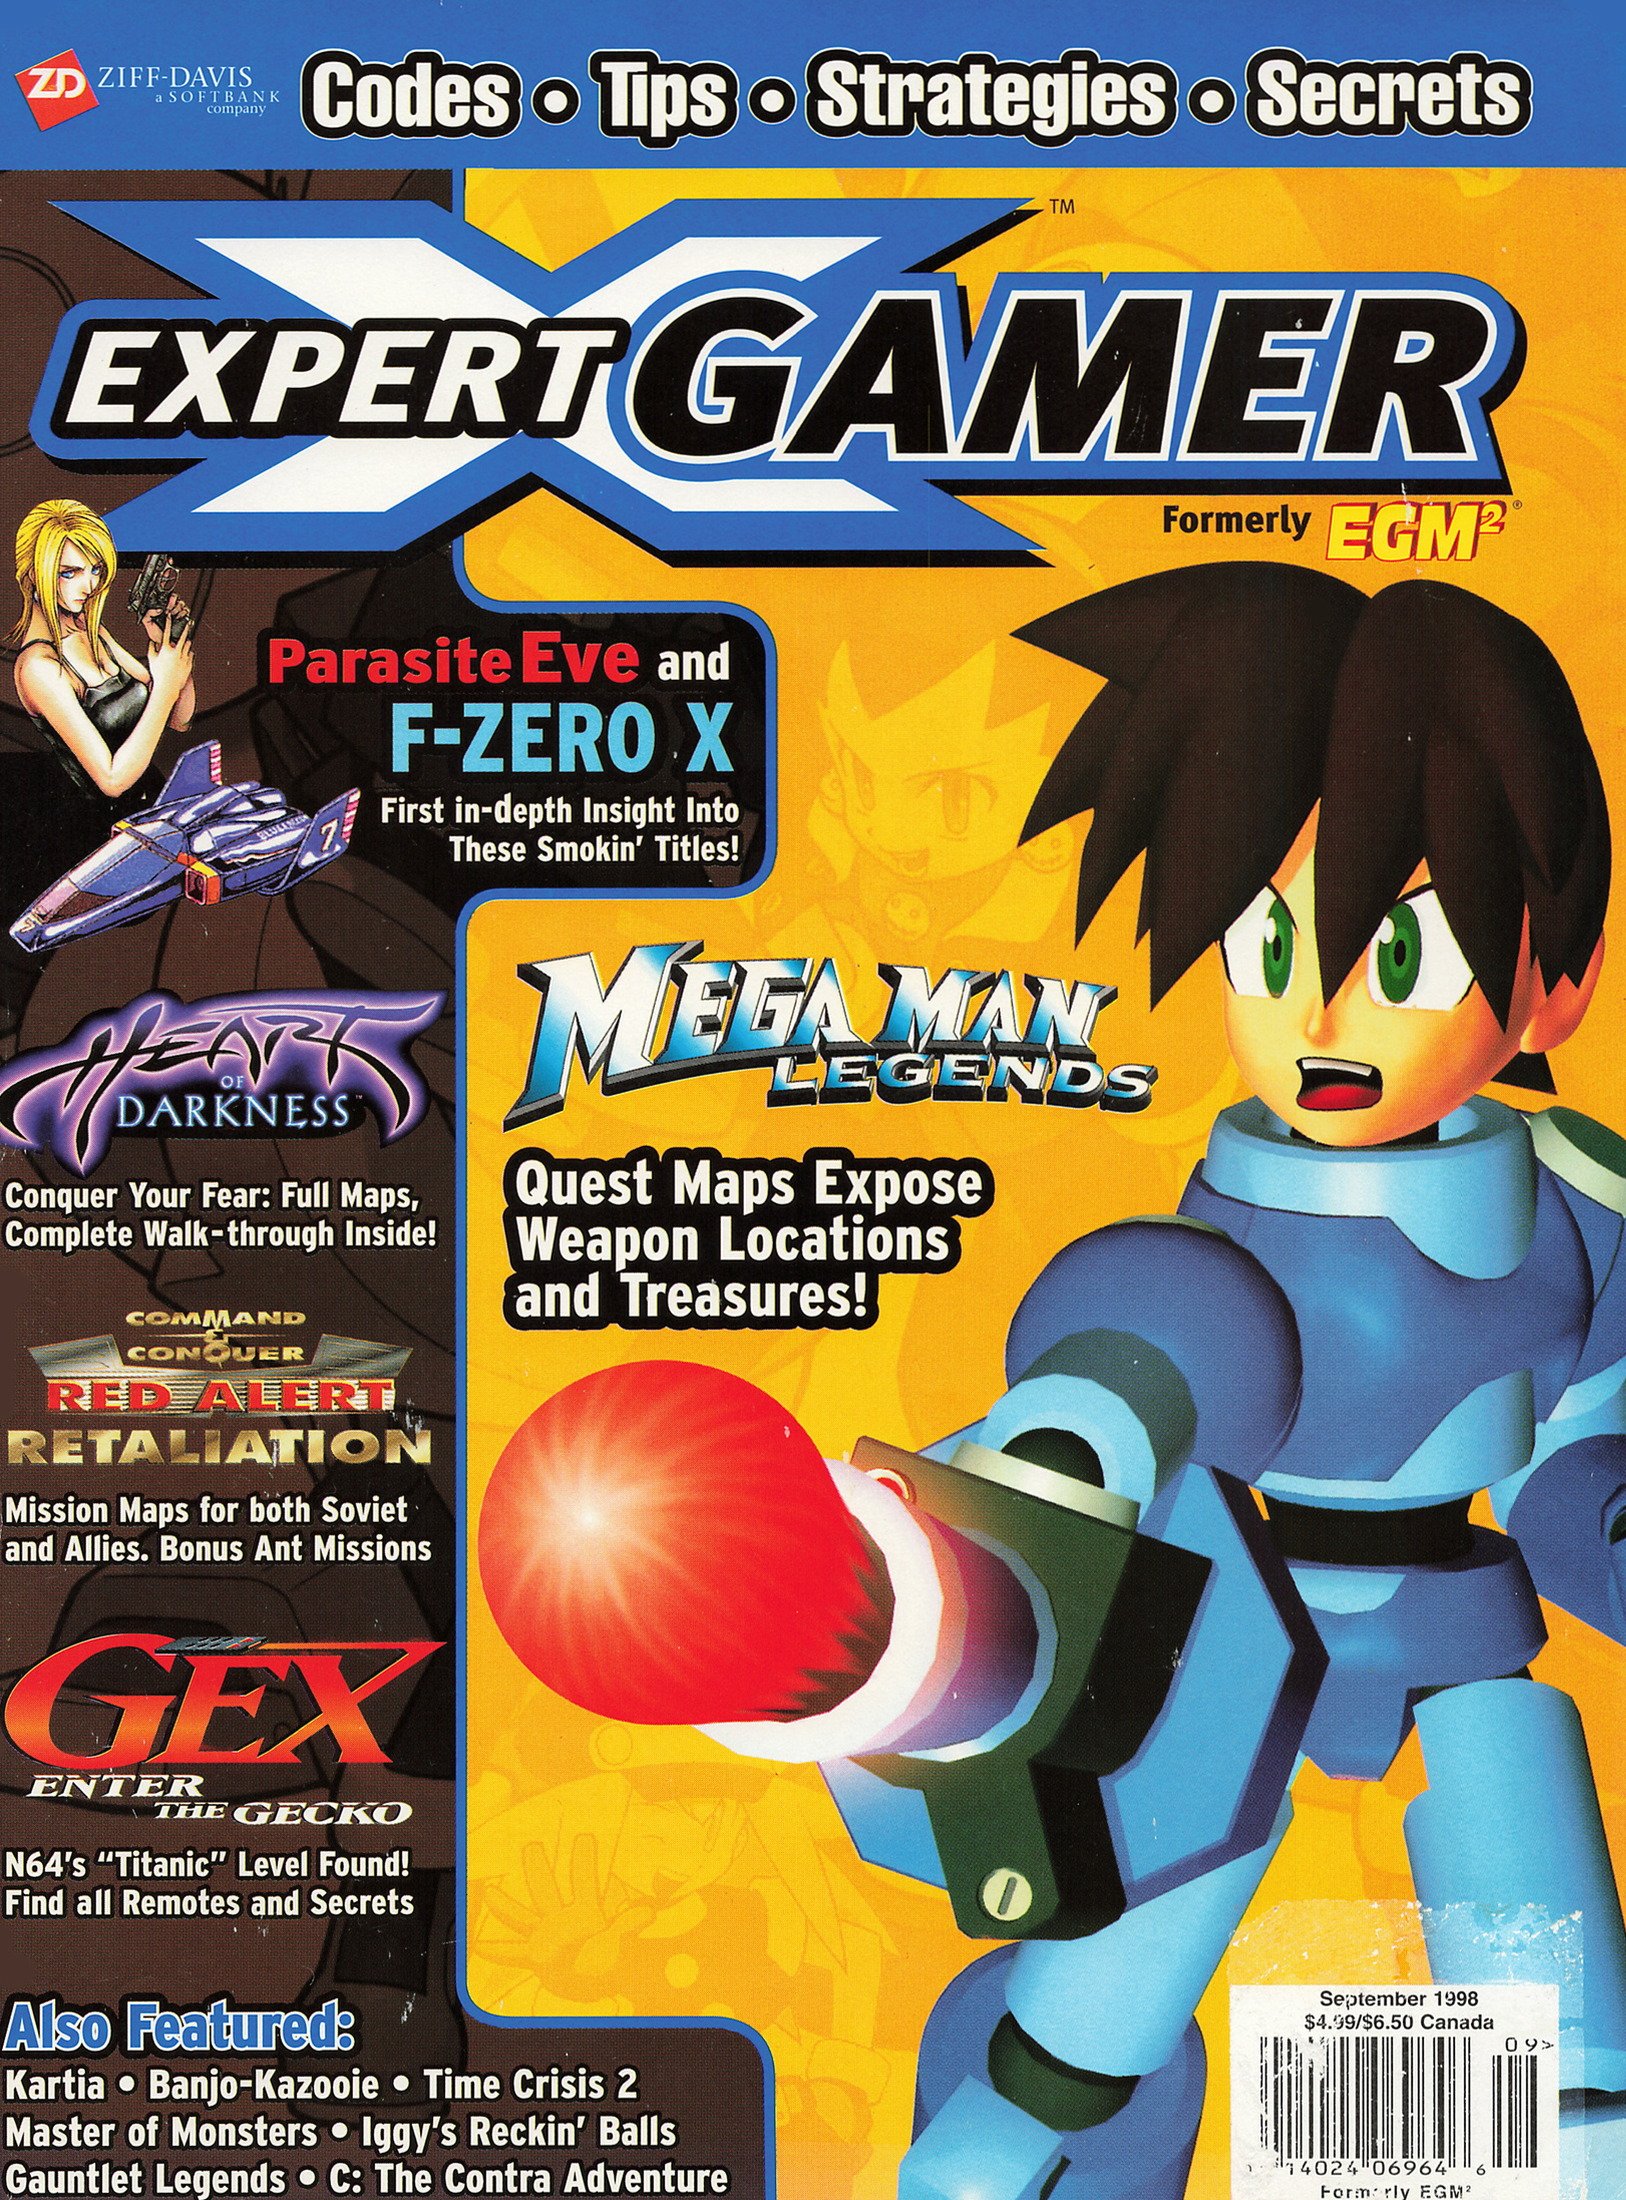 More information about "Expert Gamer Issue 51 (September 1998)"